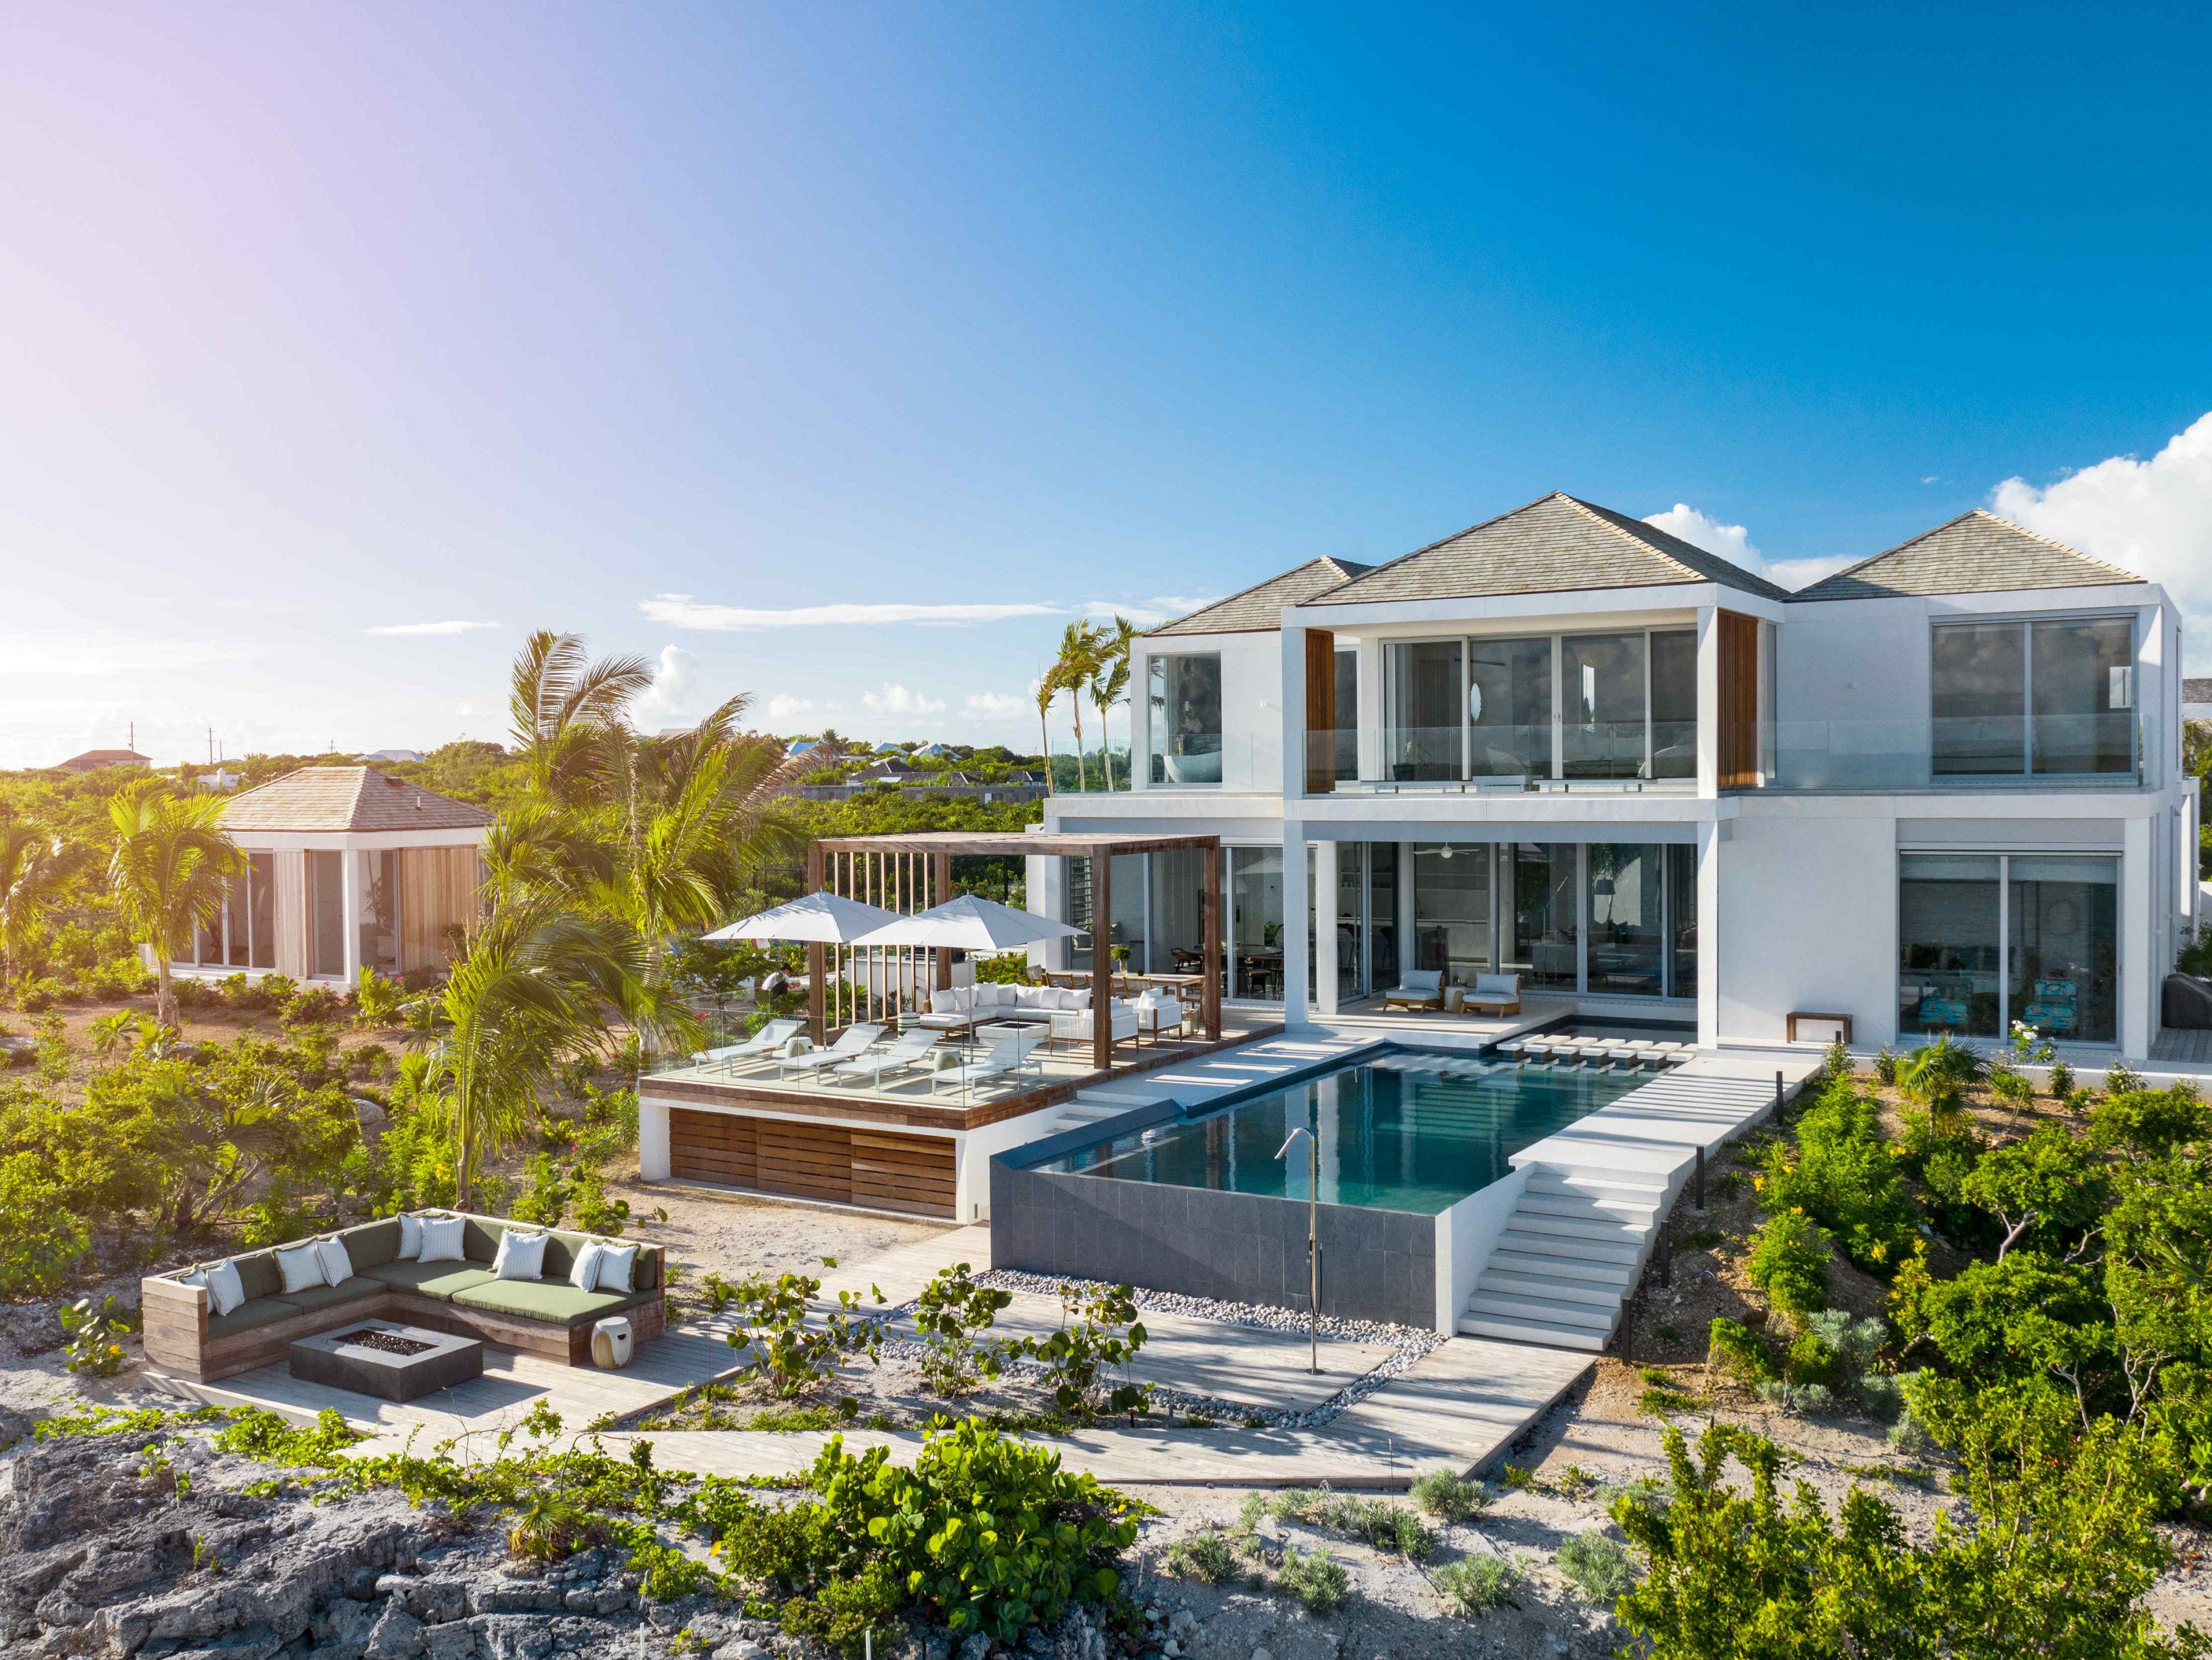 Blondel Cove is one of the best places to stay in Turks and Caicos